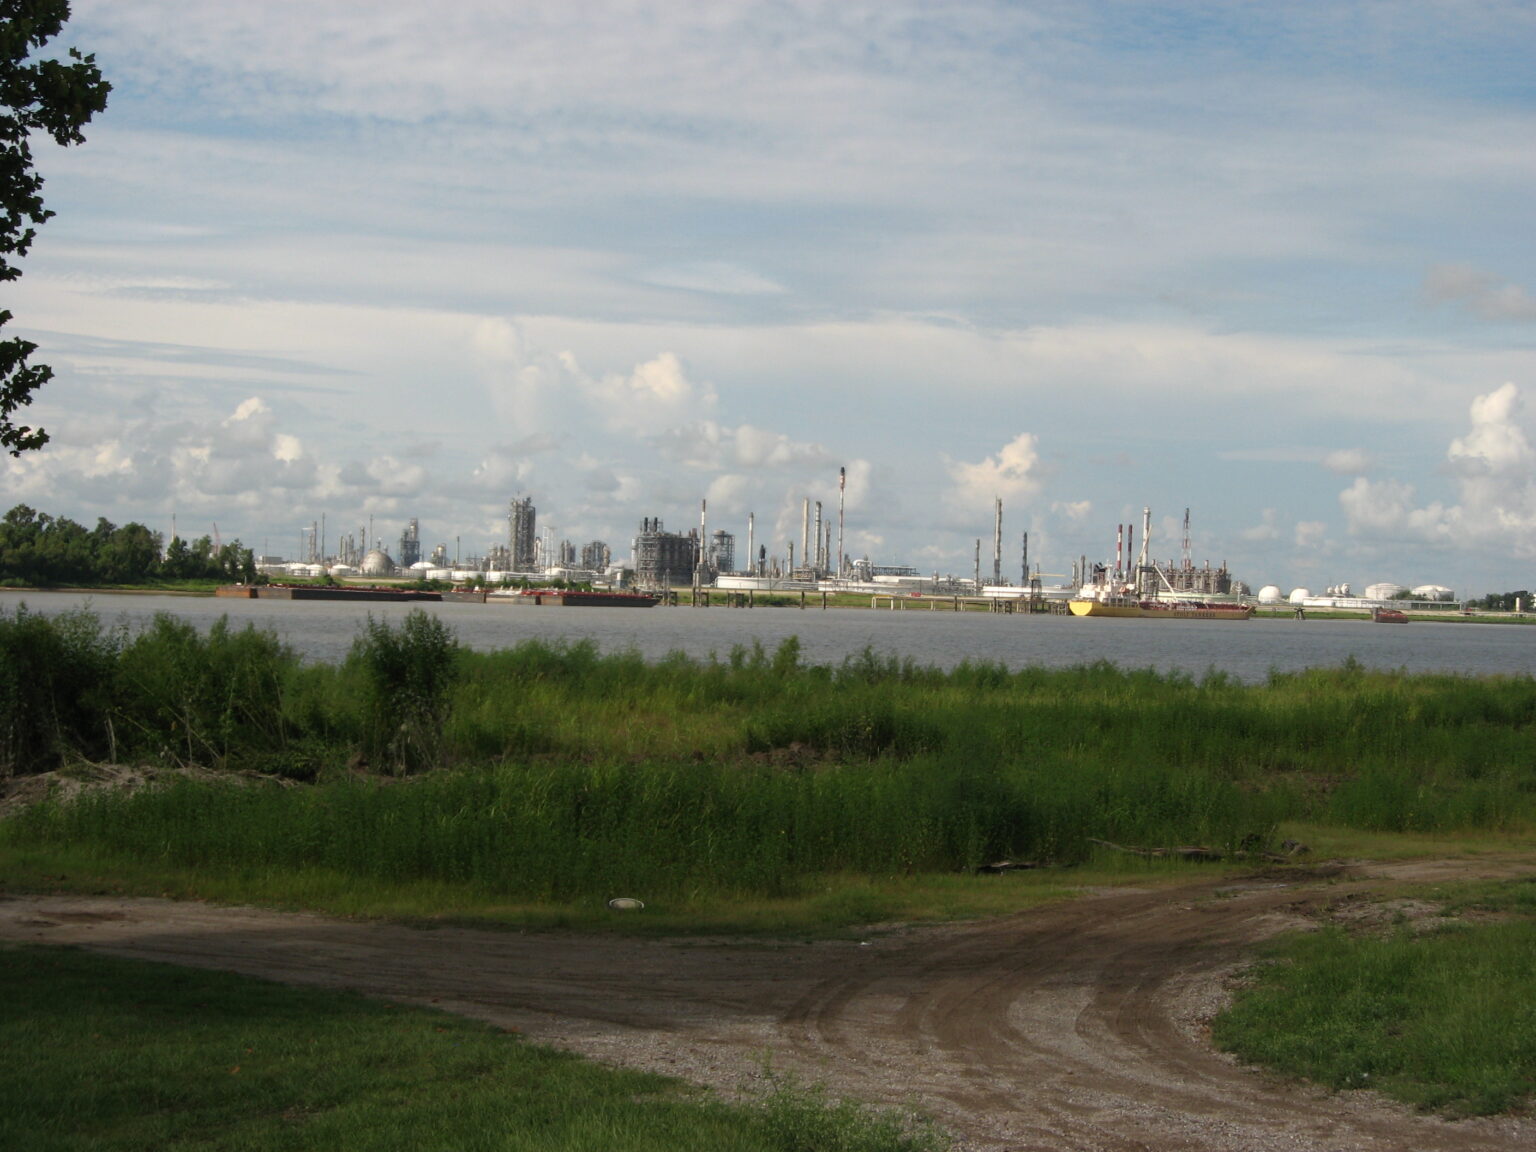 Petrochemical stacks and other elements of the industry, including ships, are viewed across the river from a spot with a dirt road.